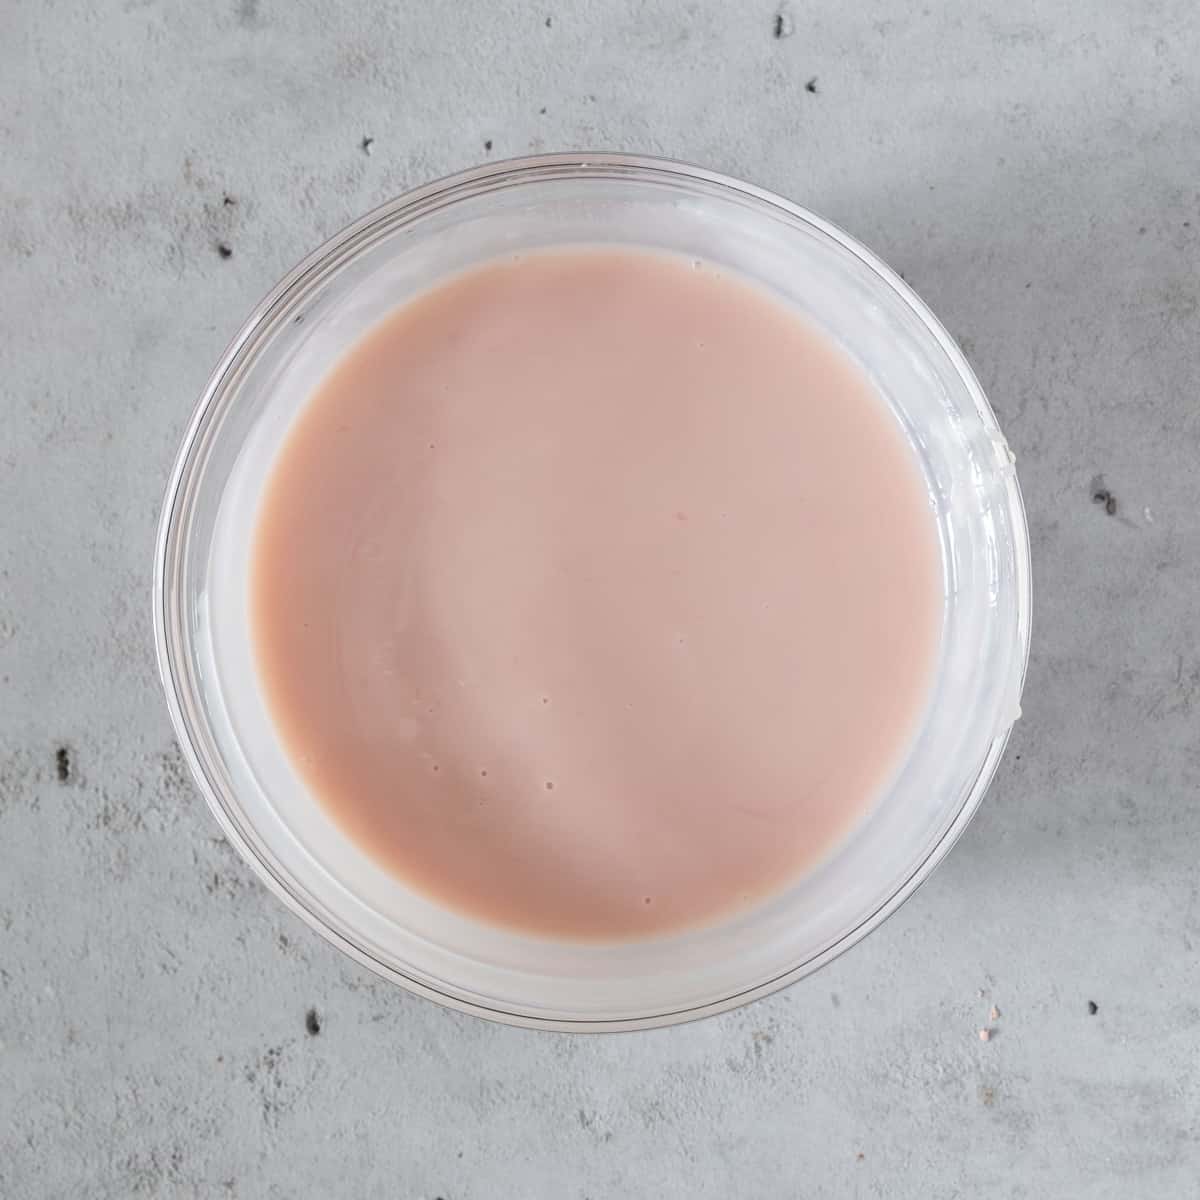 the pink lemonade concentrate and sweetened condensed milk combined in a glass bowl on a grey background.